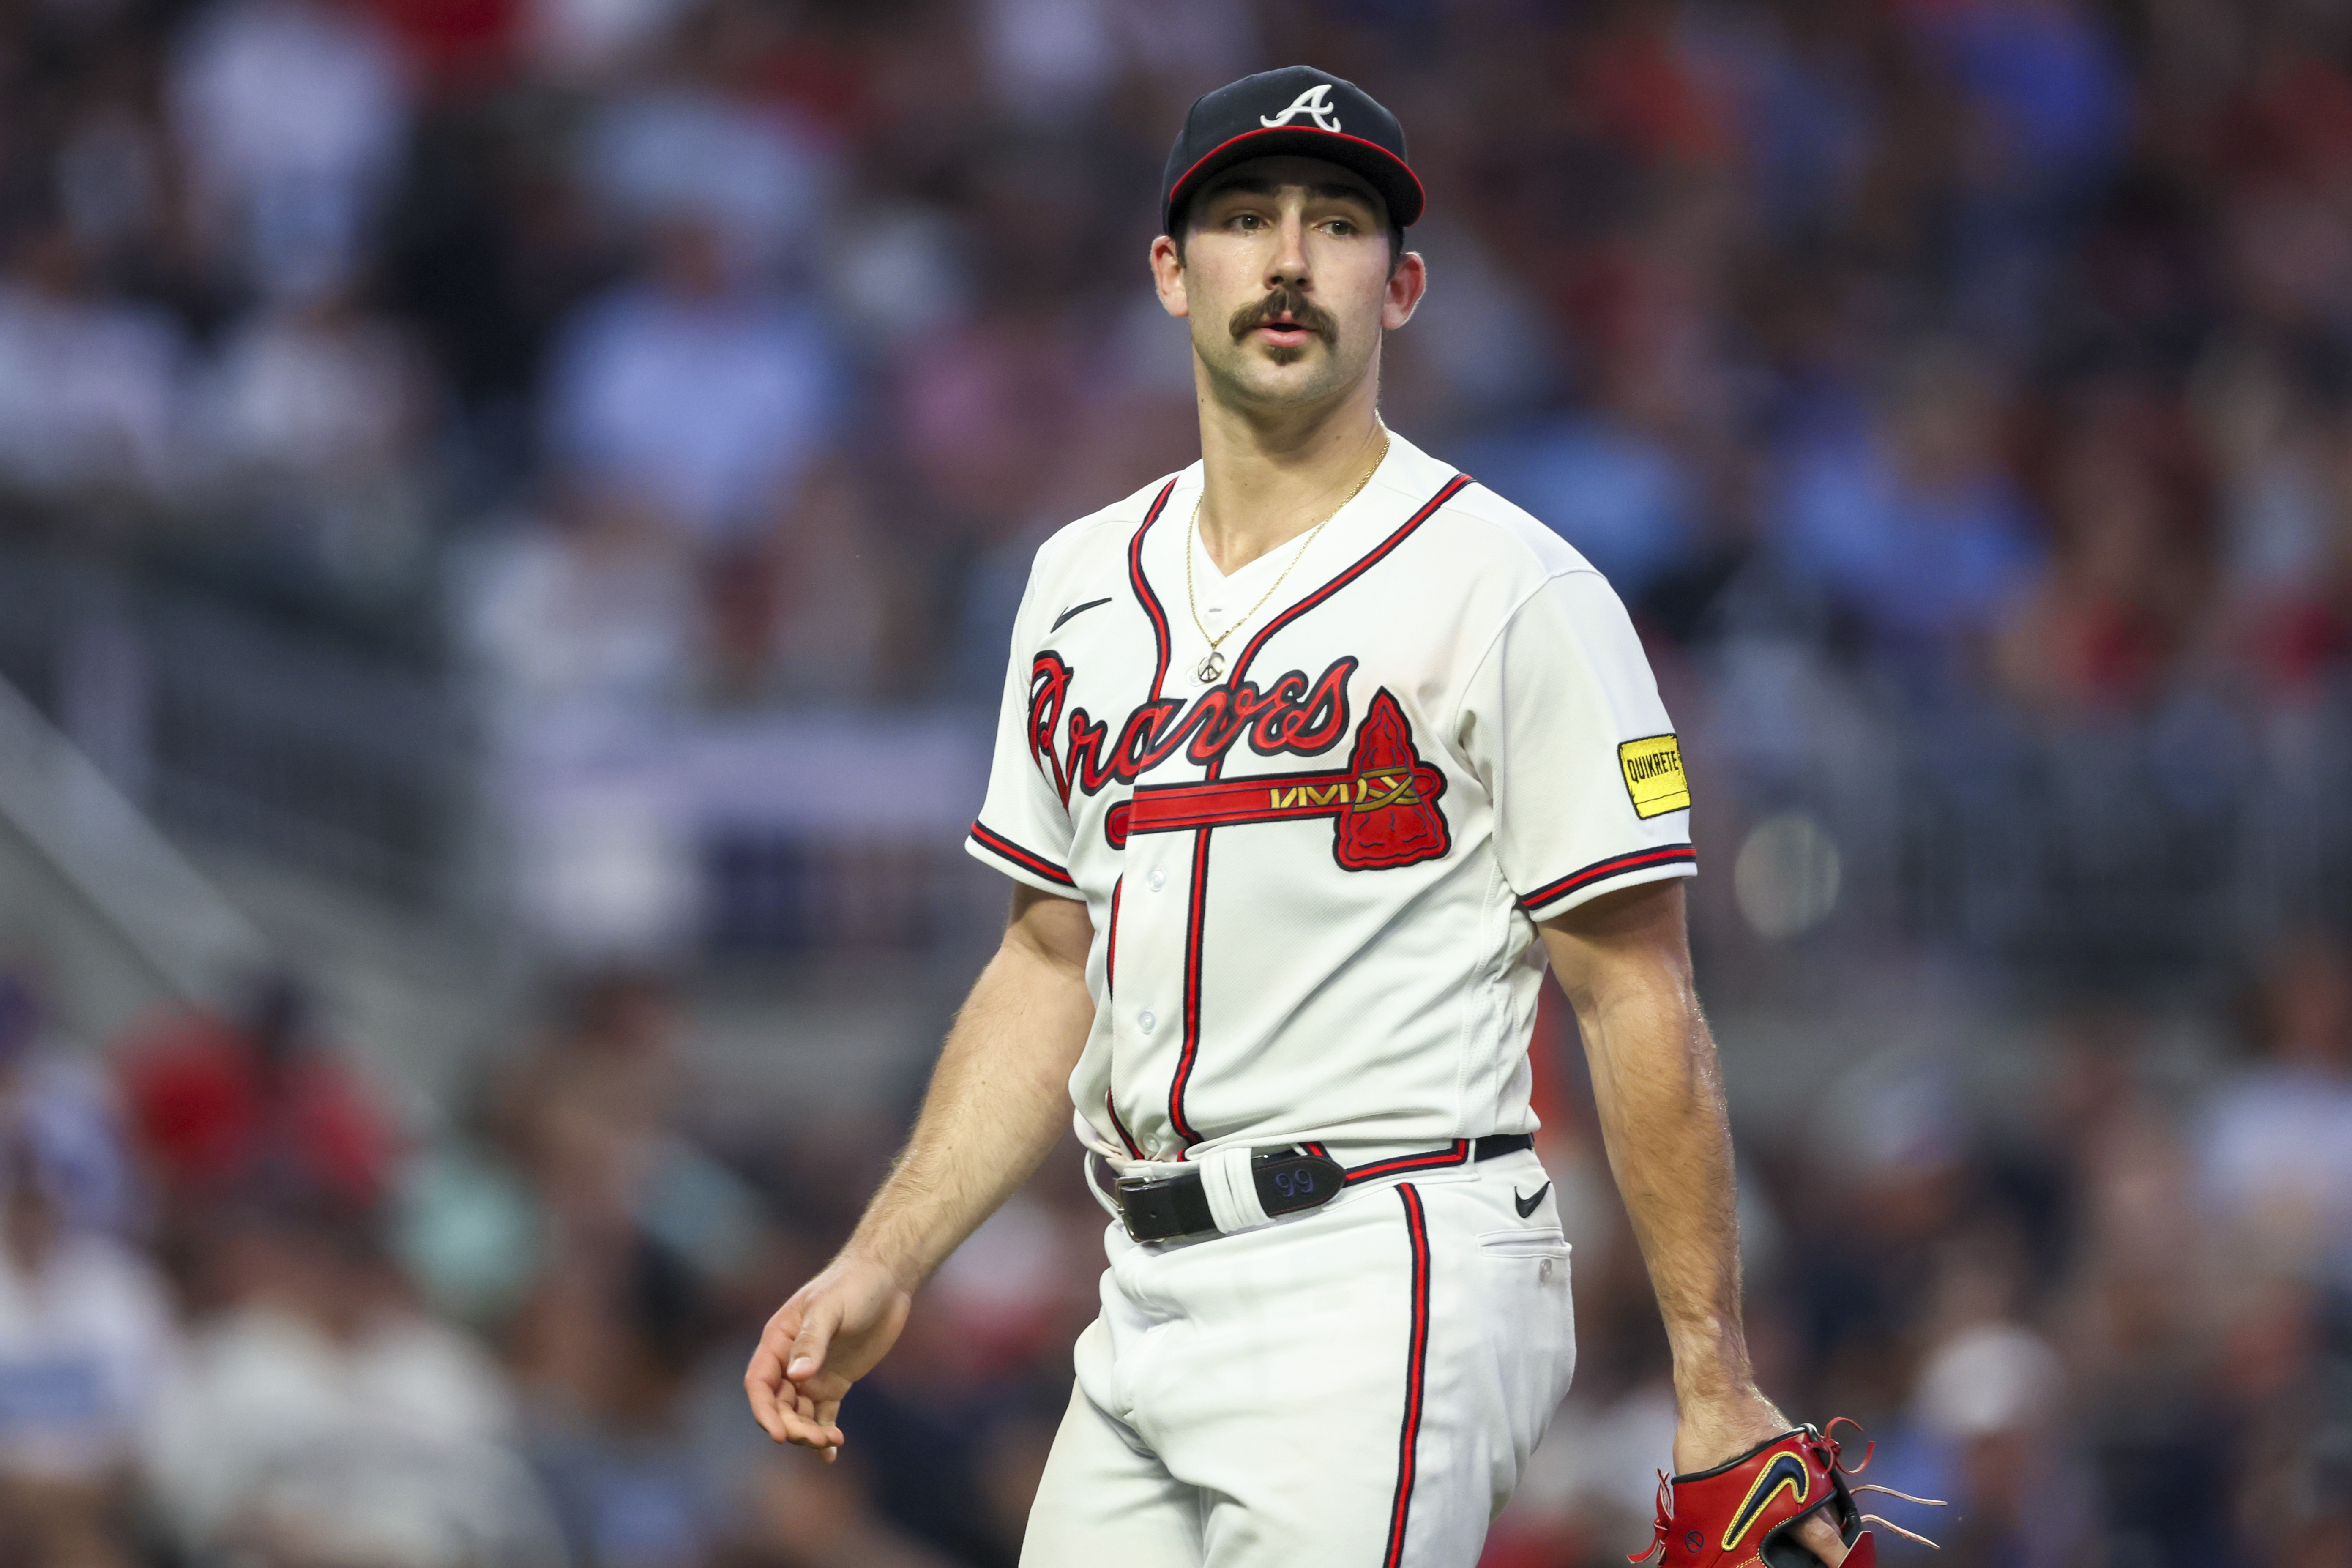 Understandably, Braves' farm system isn't what it used to be